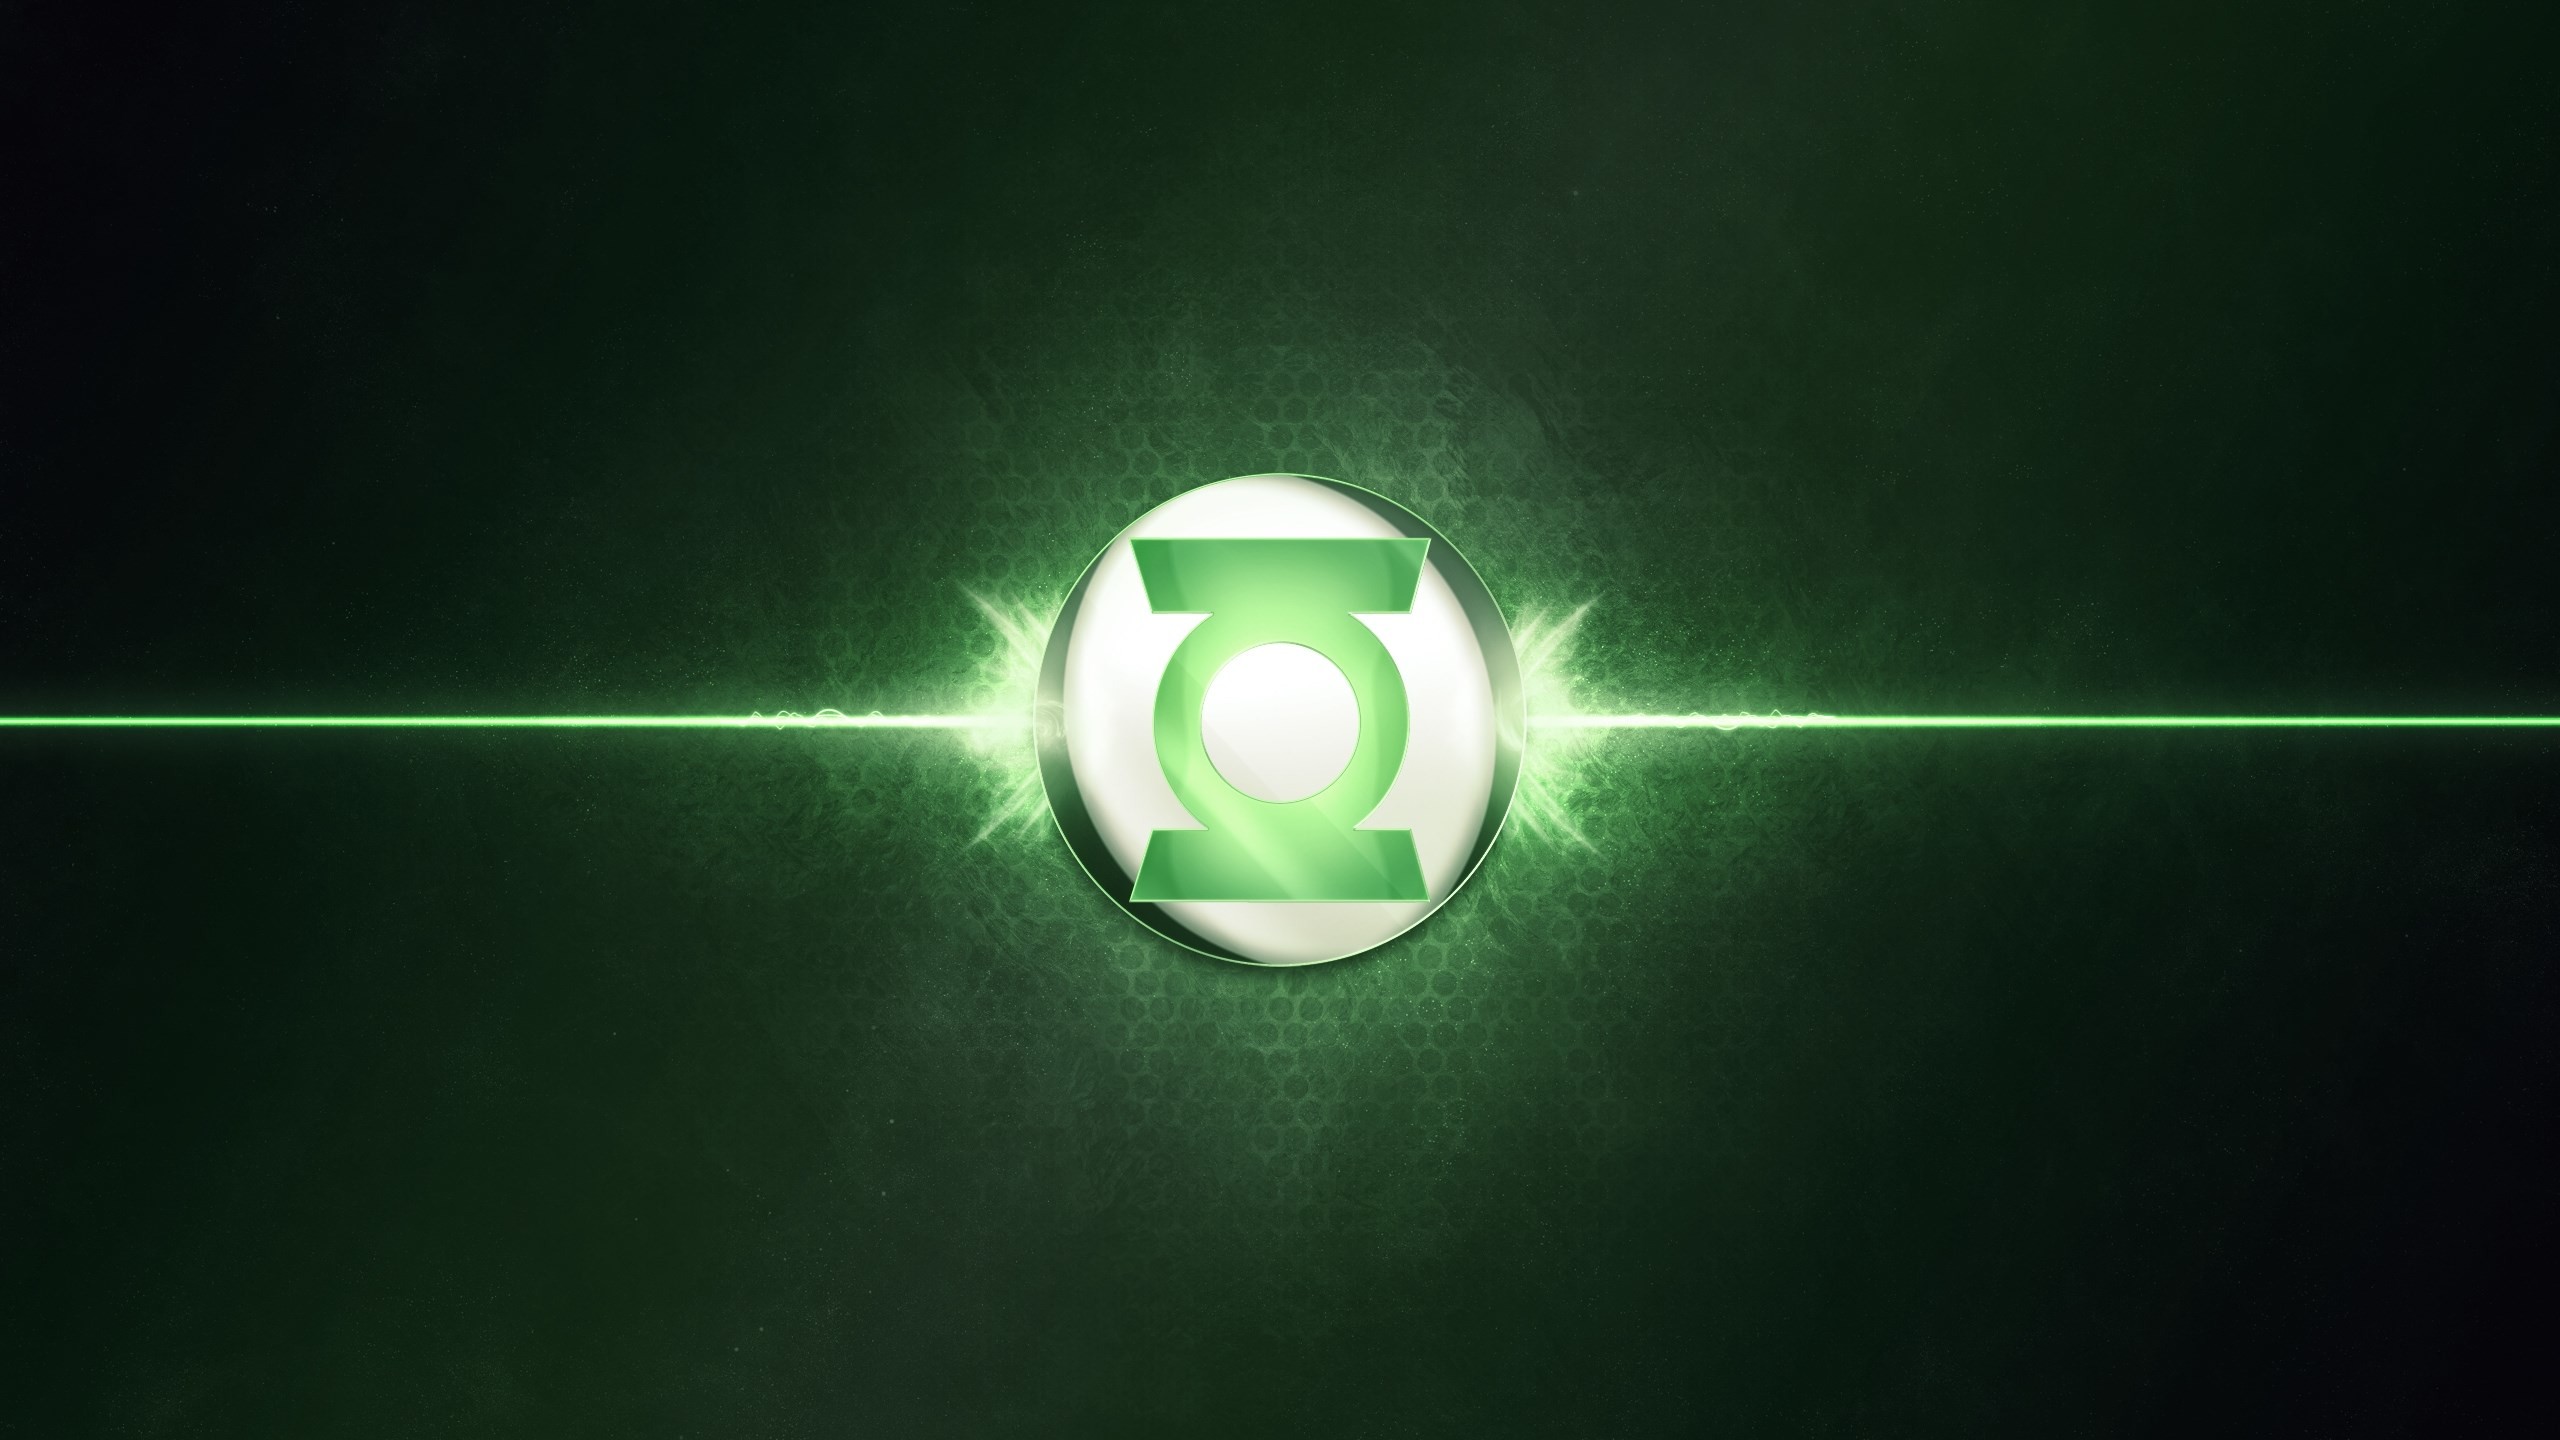 2560x1440 px green lantern theme background images by Kemp Peacock